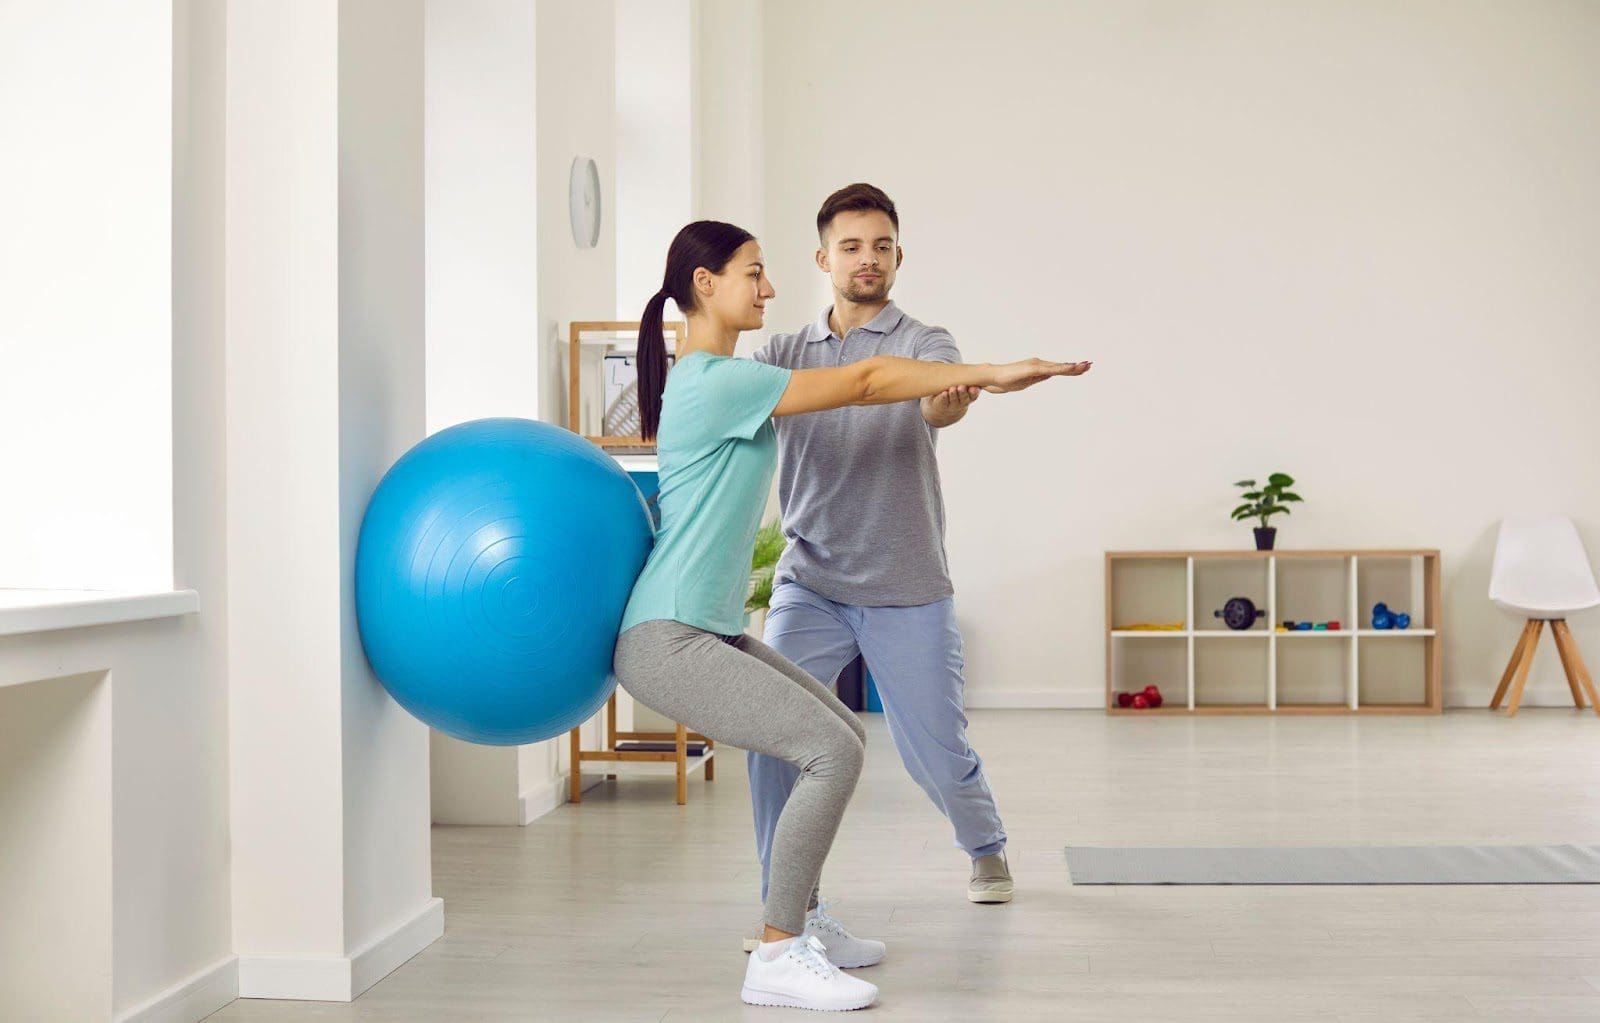 Chiropractor coaching a woman who is using an exercise ball.